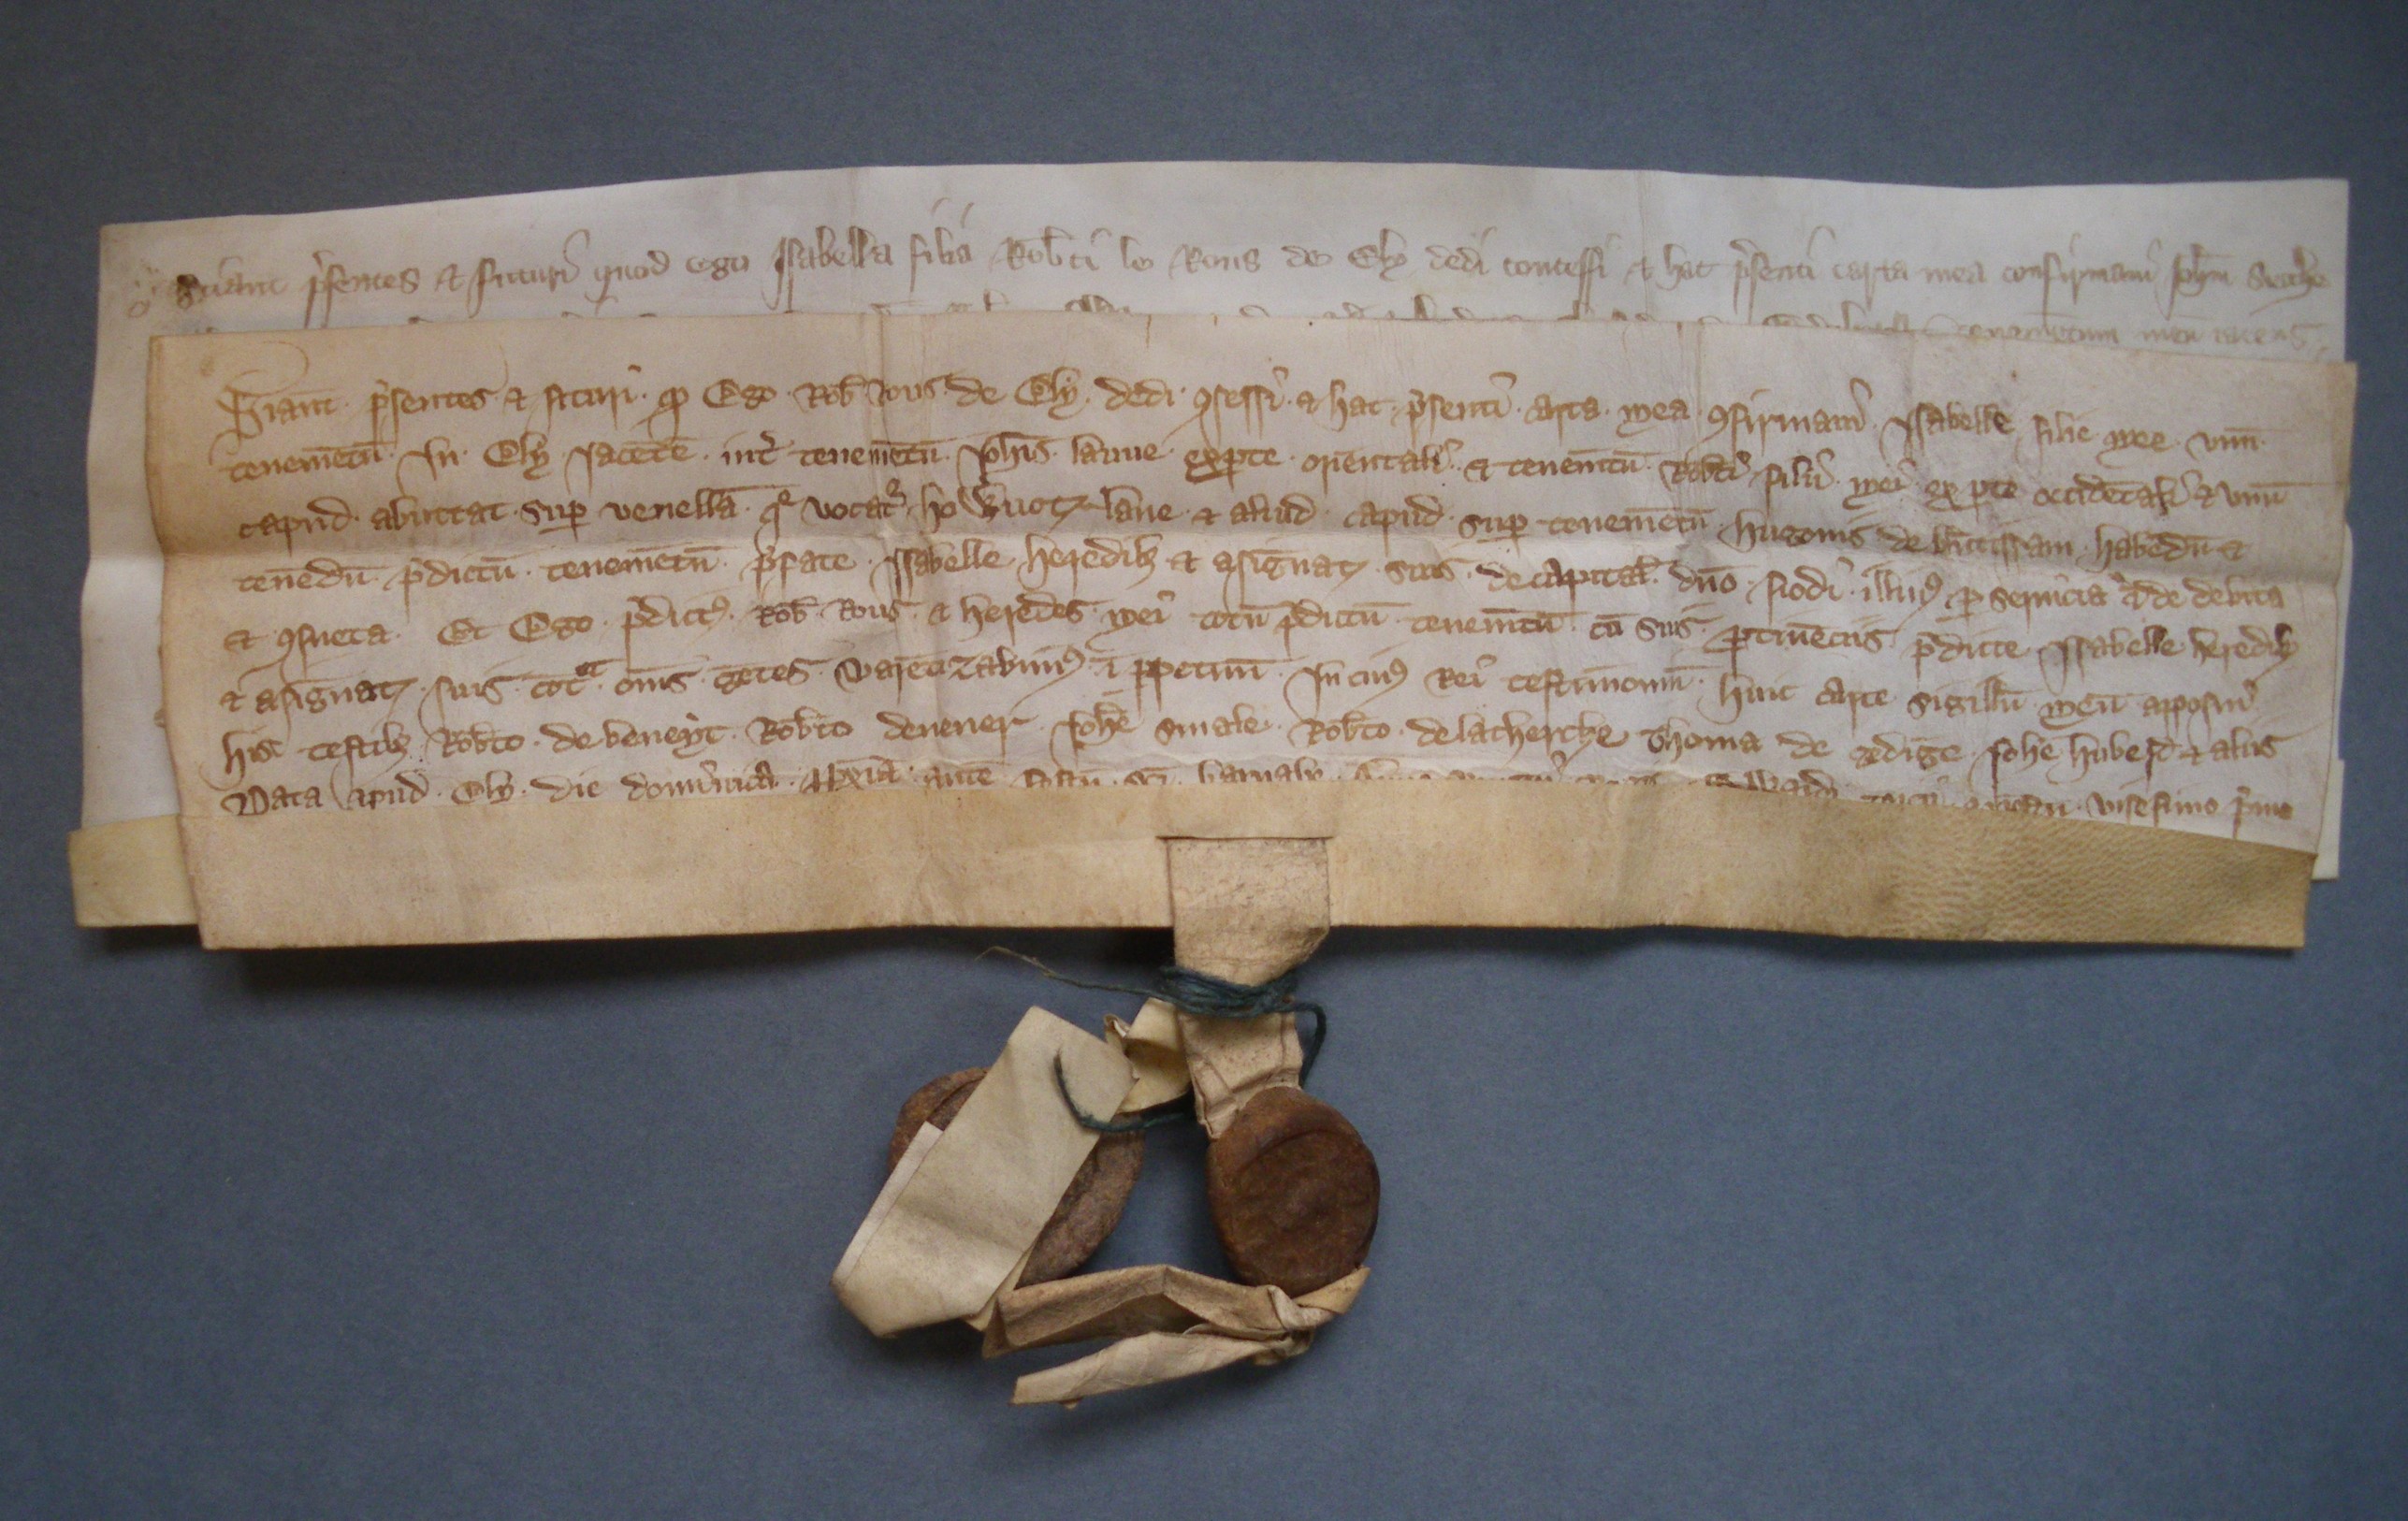 Grant of land to Isabella Rous by her father, granted by her in turn 12 years later